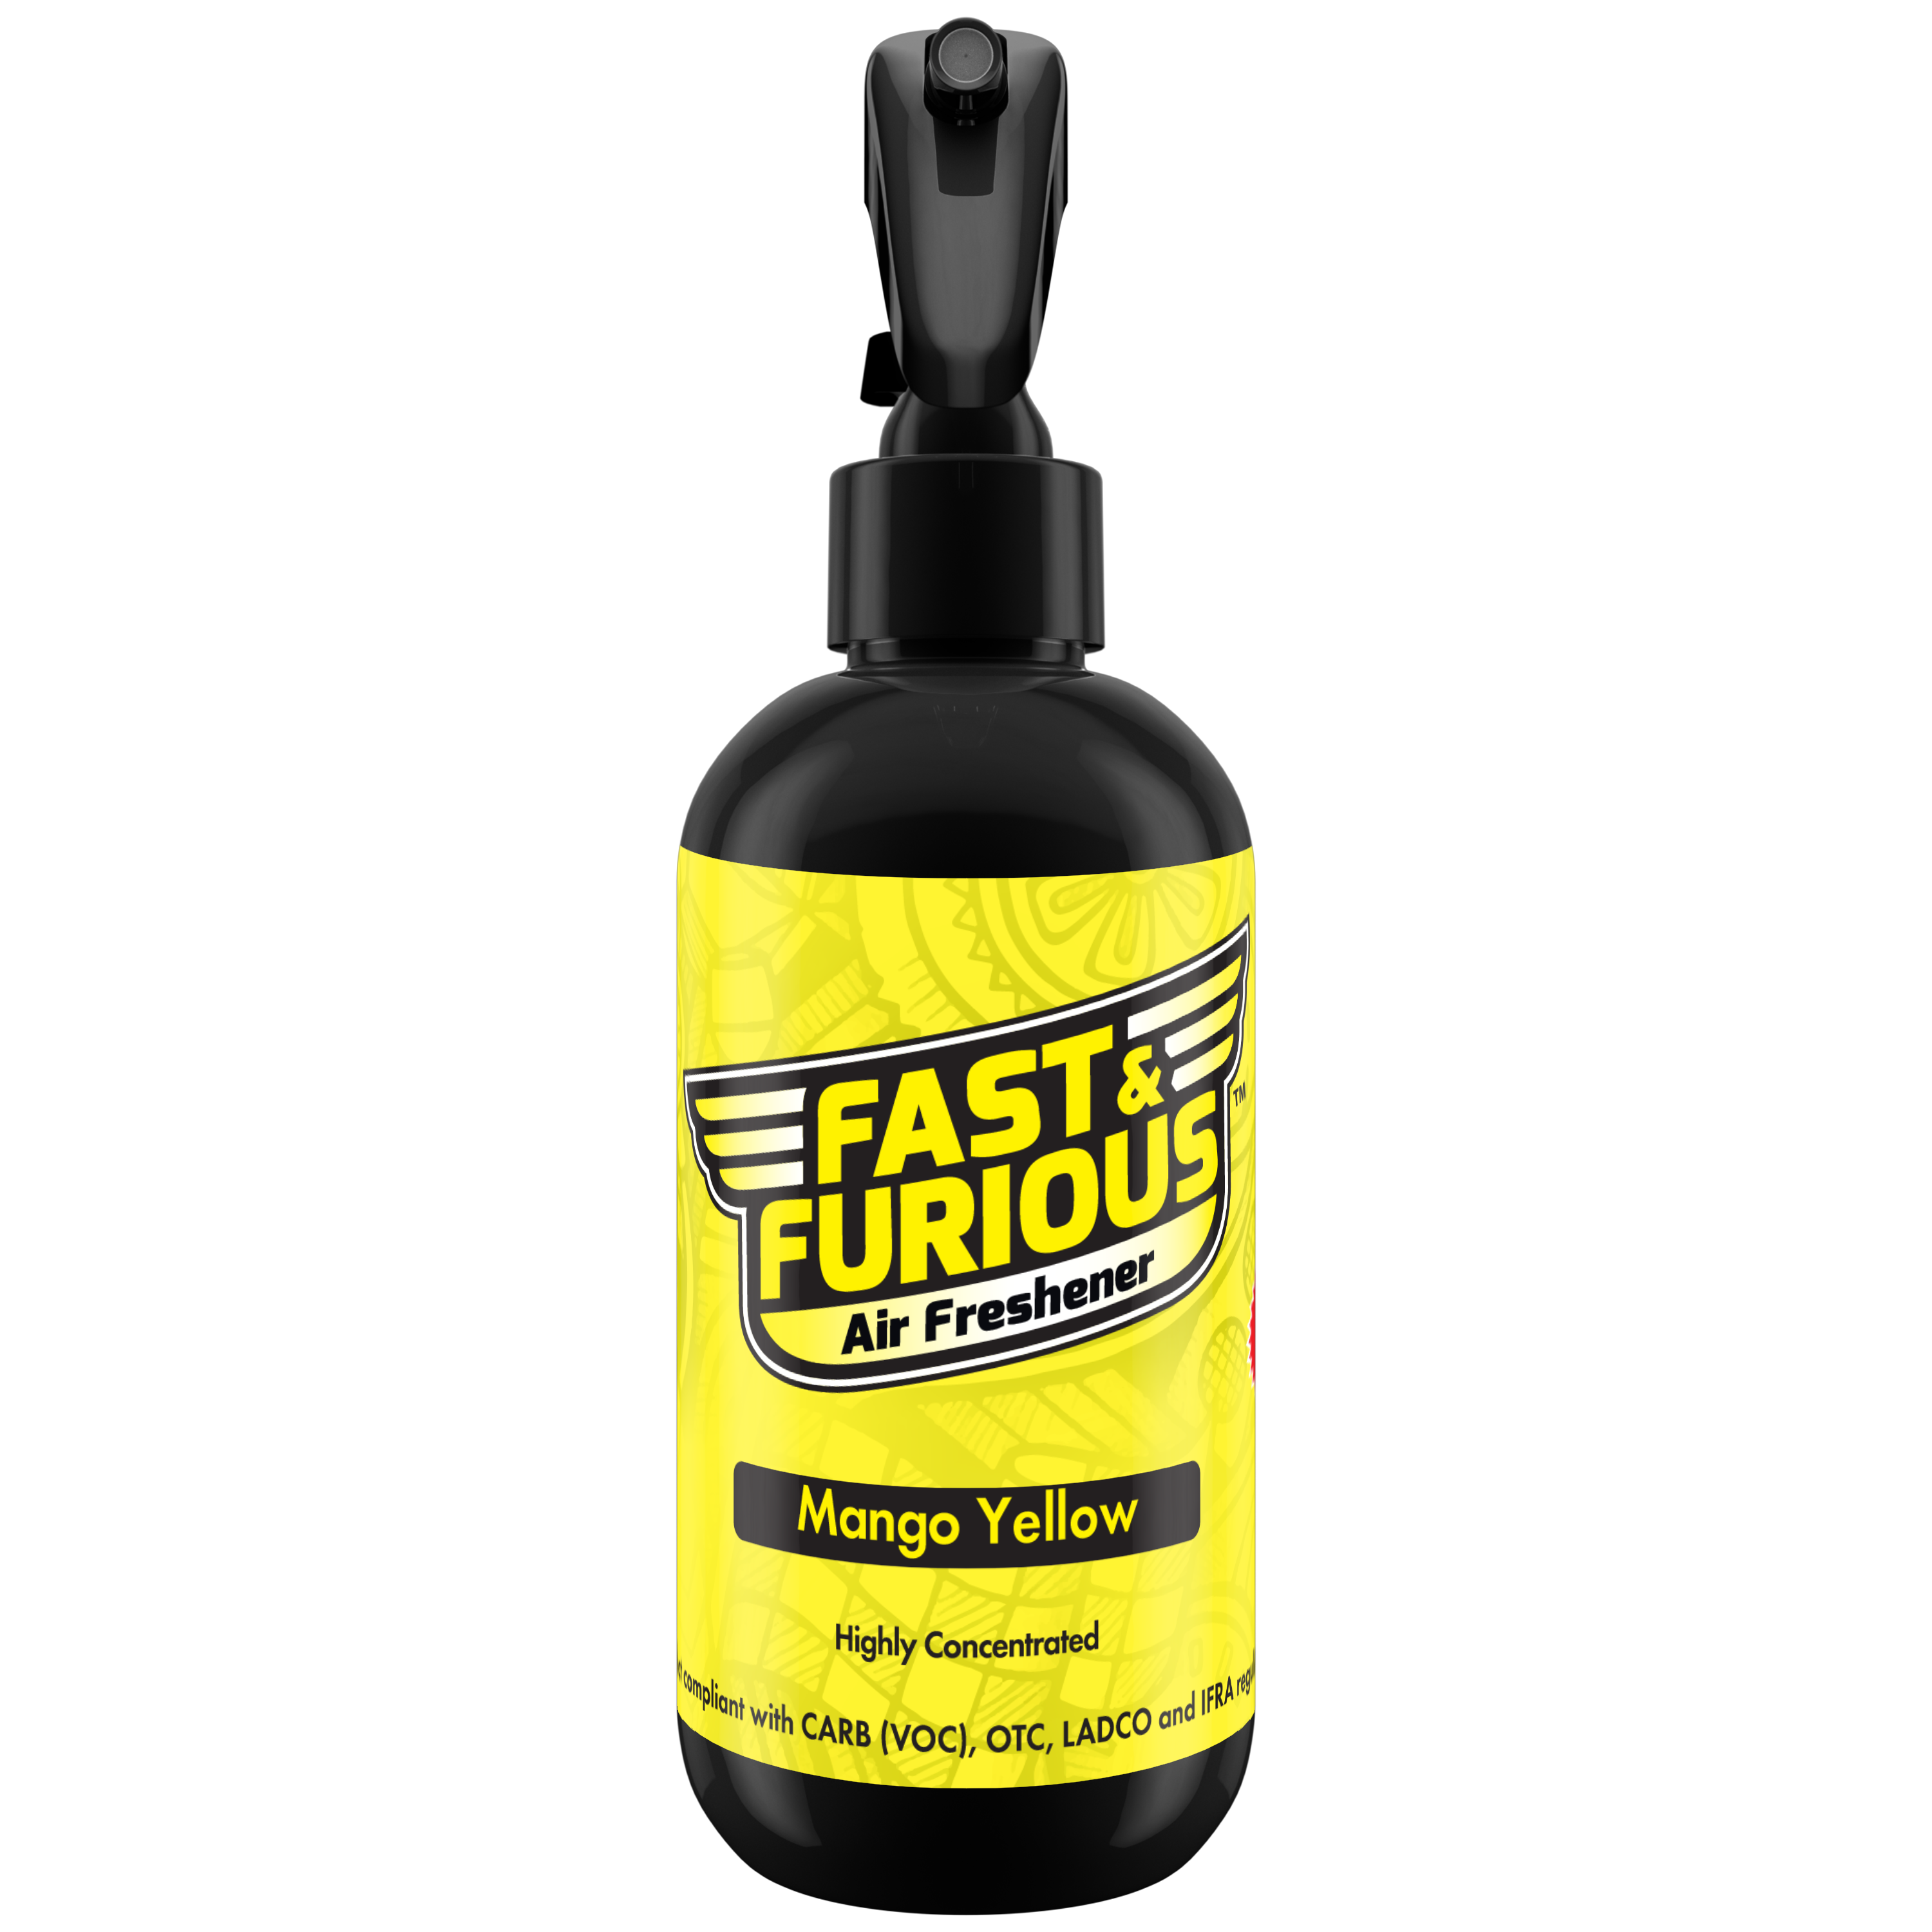 Fast and Furious Air Freshener - Mango Yellow Scent